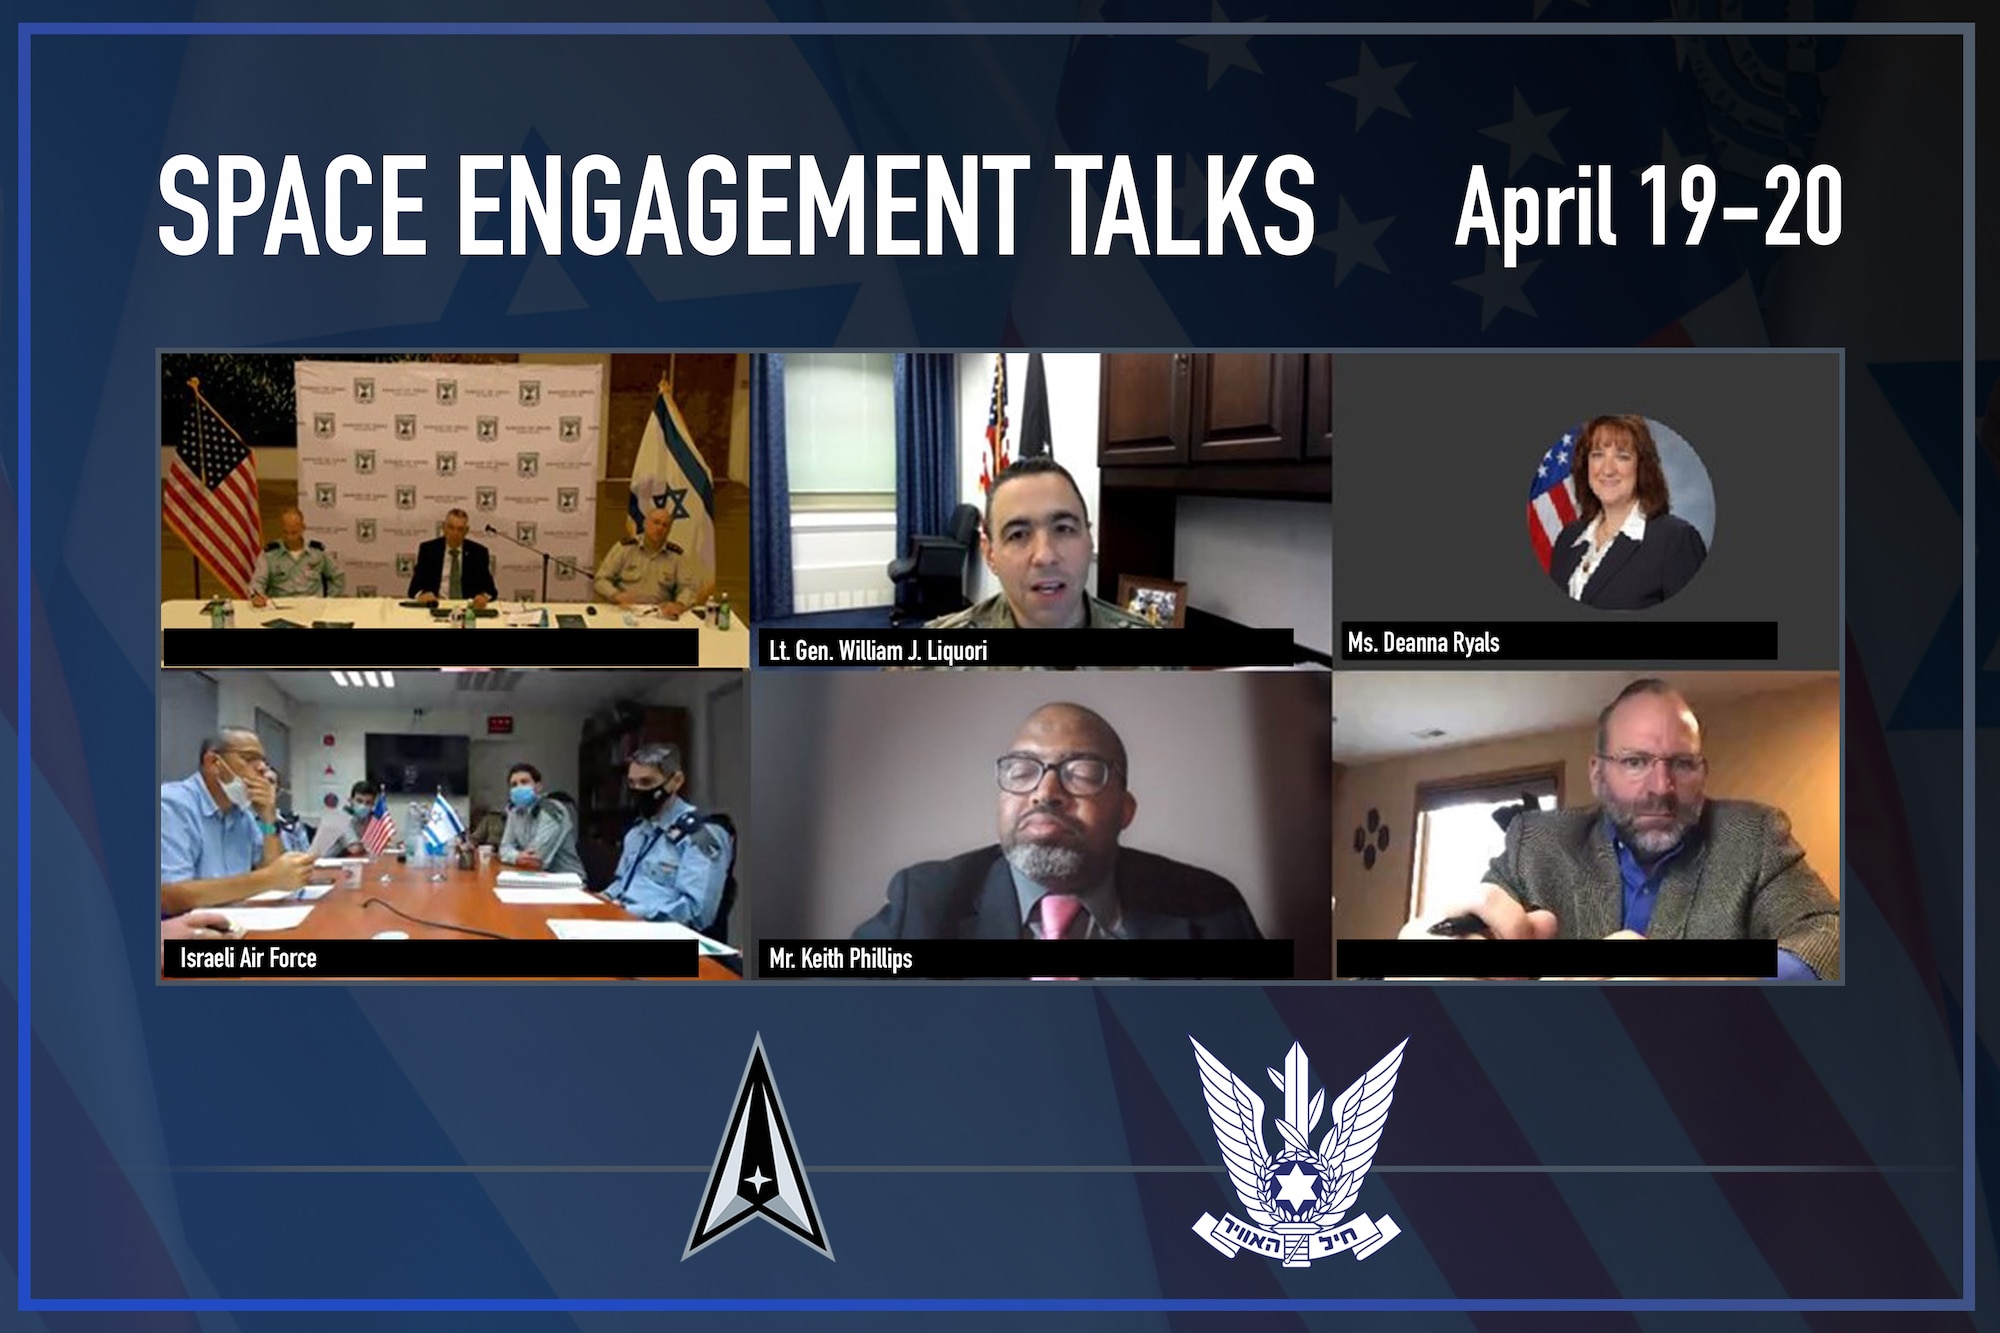 The U.S. Space Force hosted its first Space Engagement Talks (SET) with the Israeli Air Force during separate virtual sessions April 19-20.